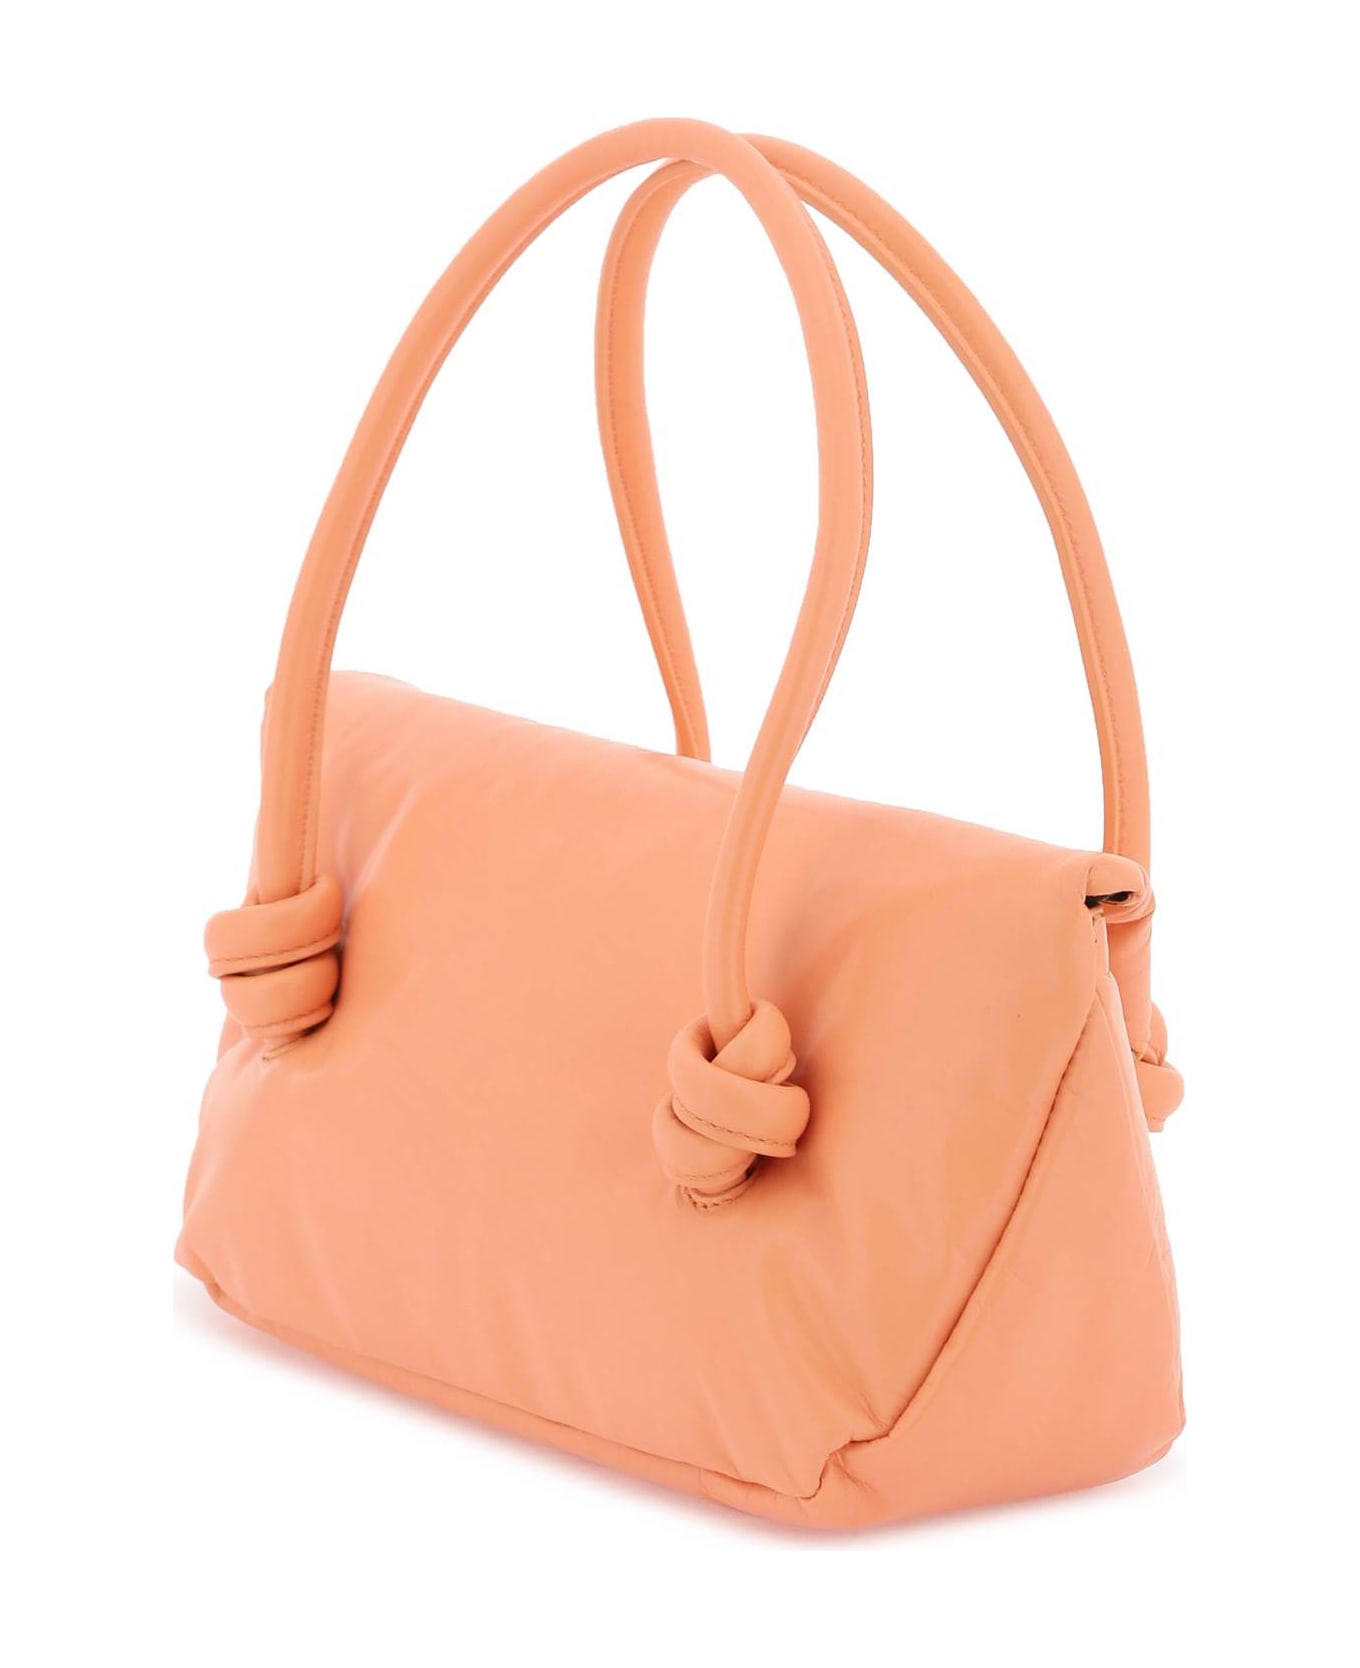 Jil Sander Patent Leather Small Shoulder Bag - PEACH PEARL (Pink) トートバッグ